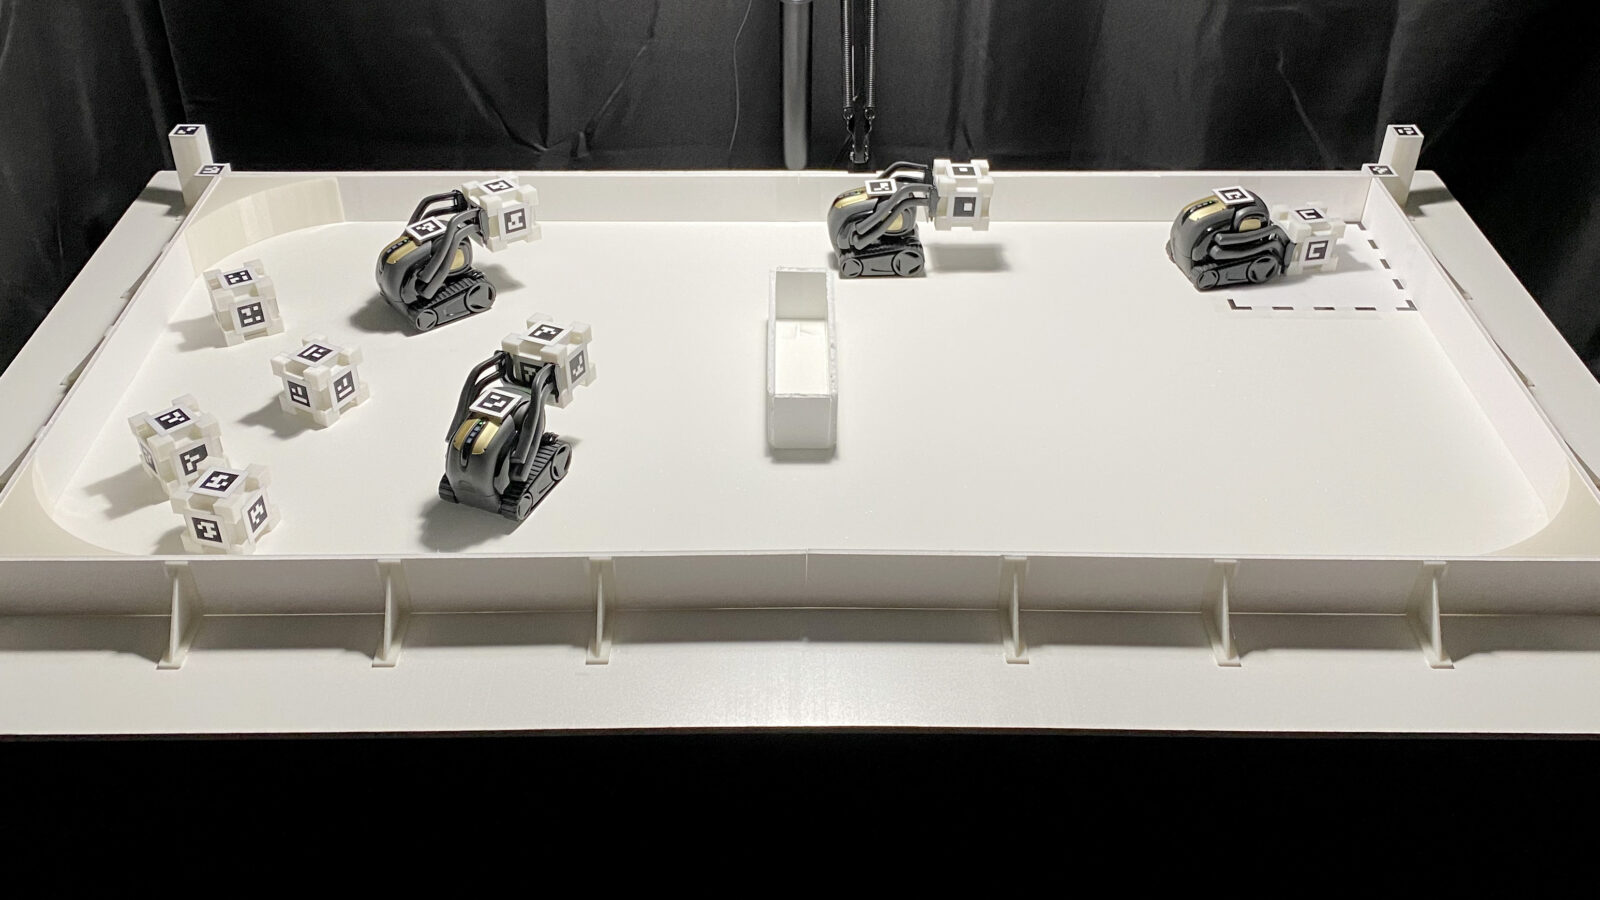 Four tiny robots on a table top with smaller marked cubes.  The robots are moving the cubes from the left side to a marked spot on the right.